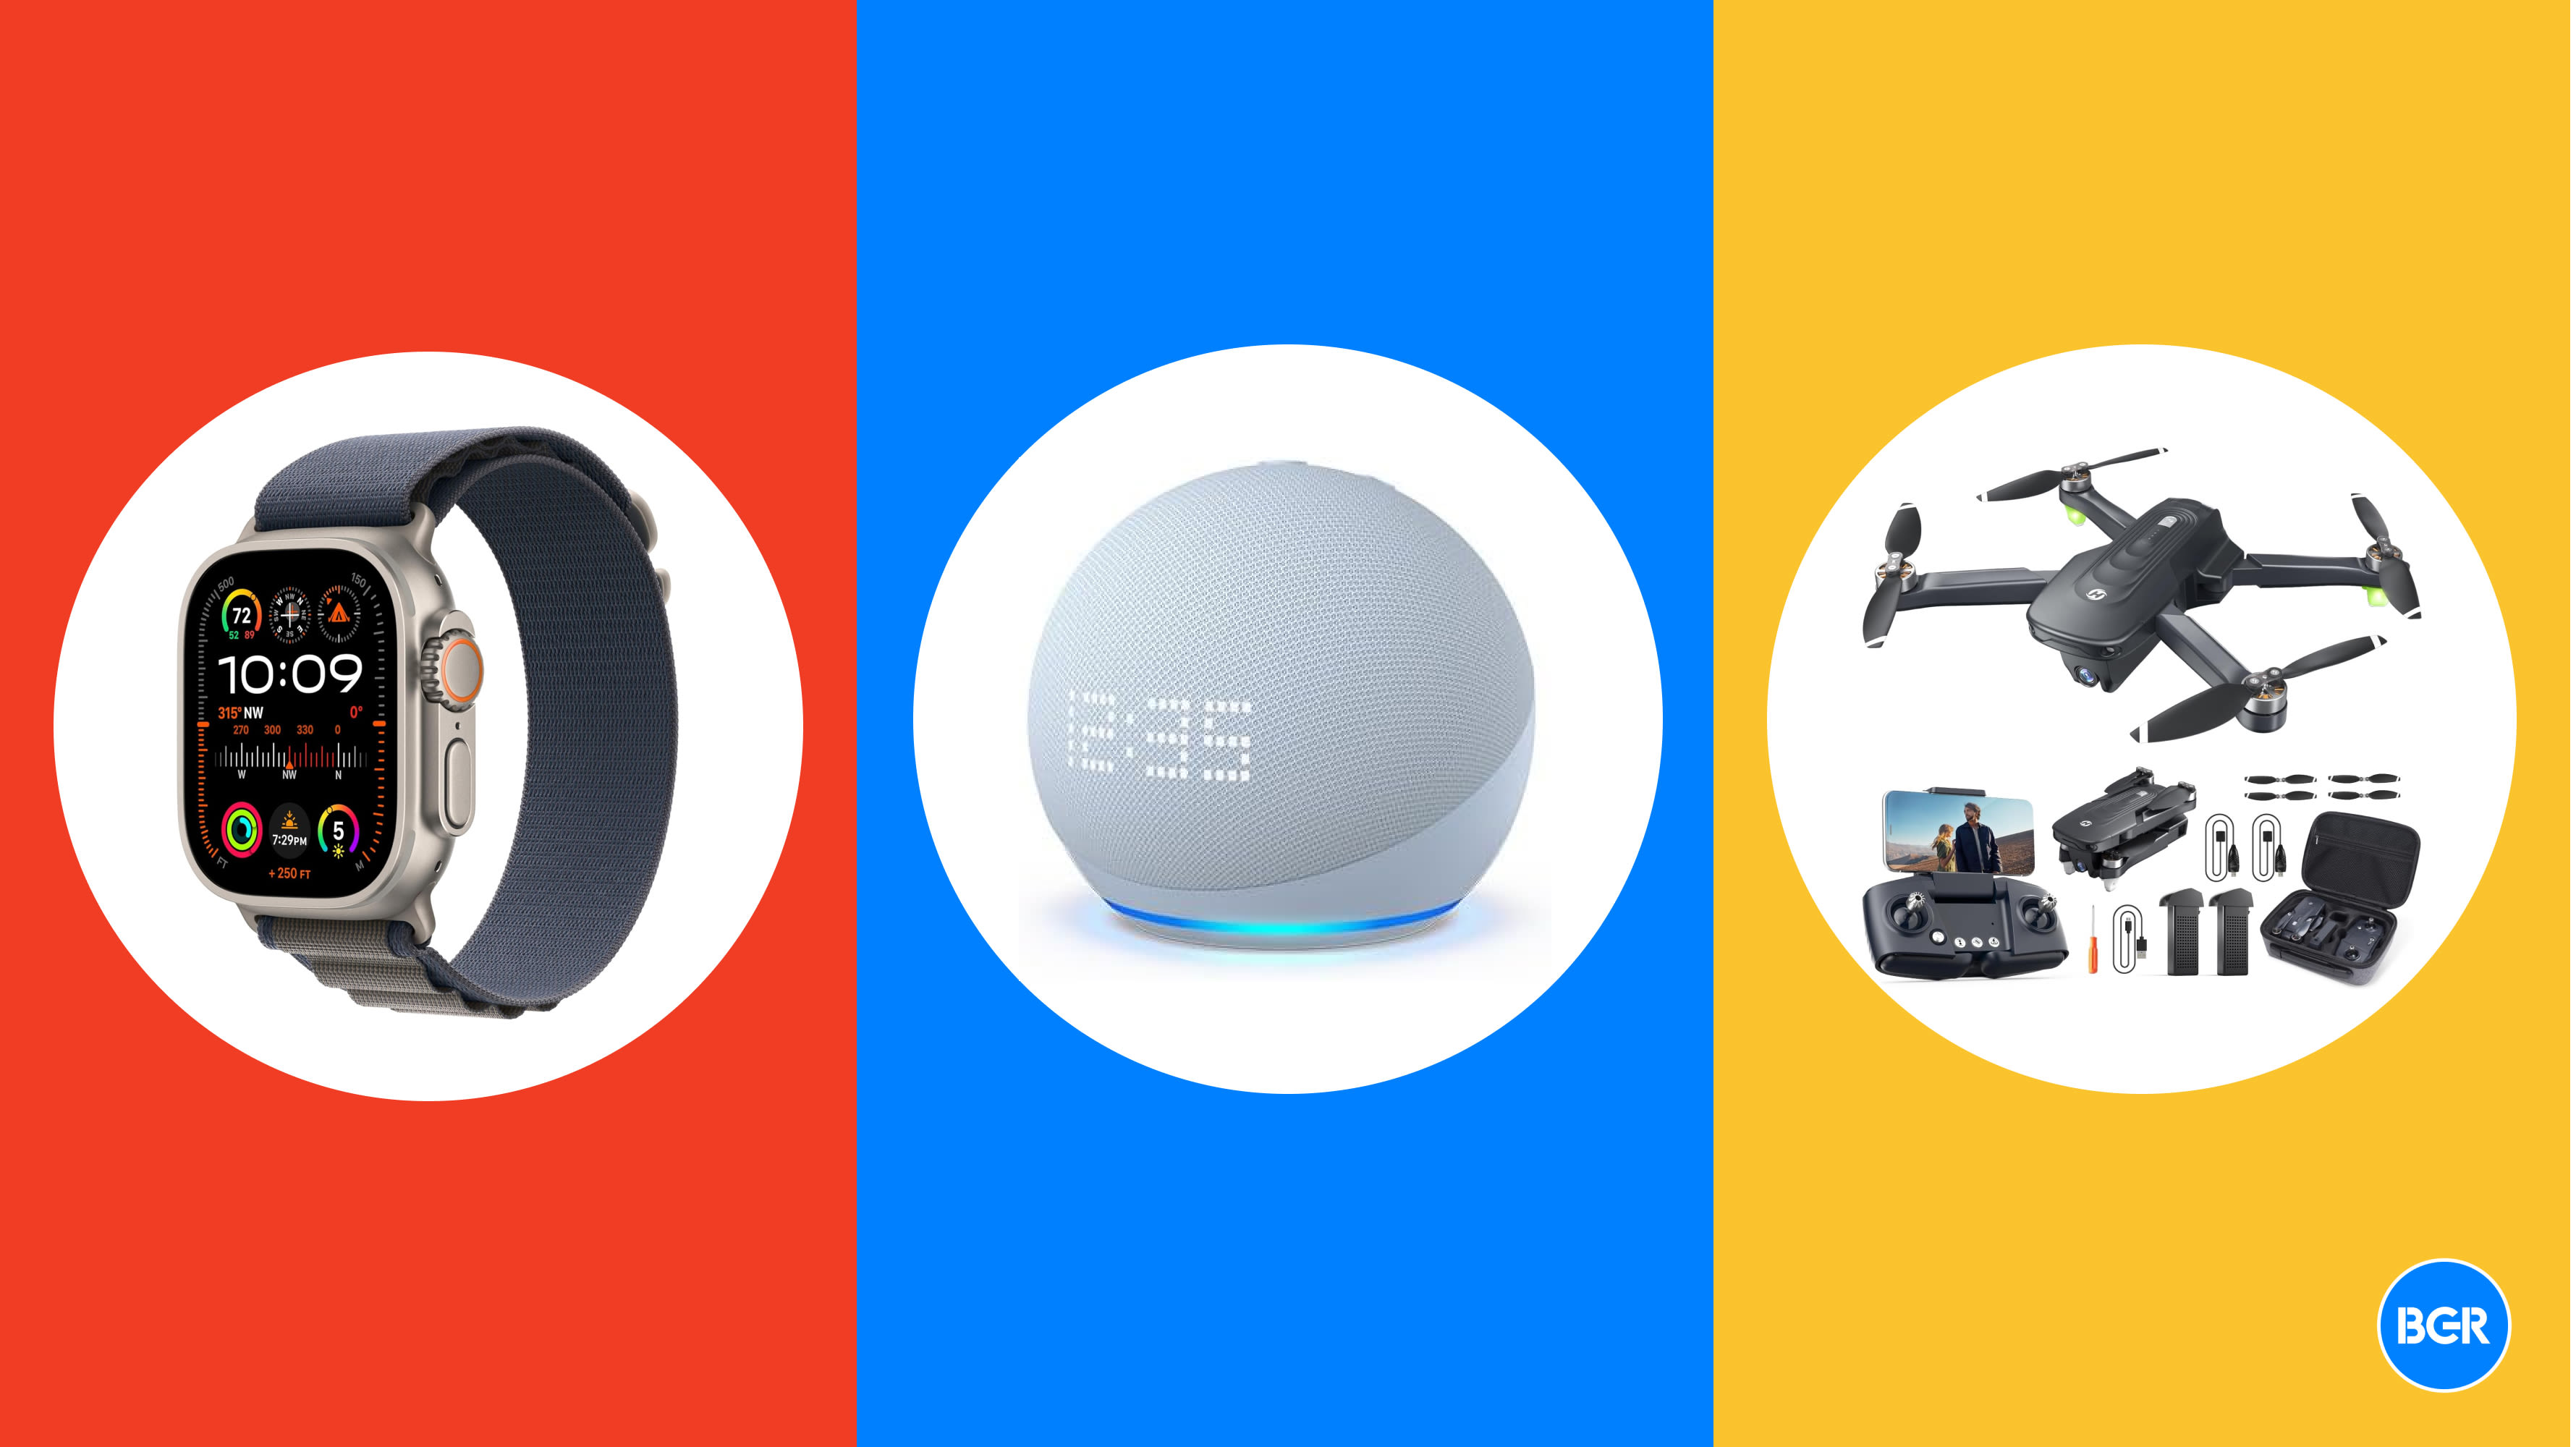 Today’s deals: $53 HP Chromebook, $850 M3 MacBook Air, 20% off LG C4 OLED TV, $28 Echo Dot, more